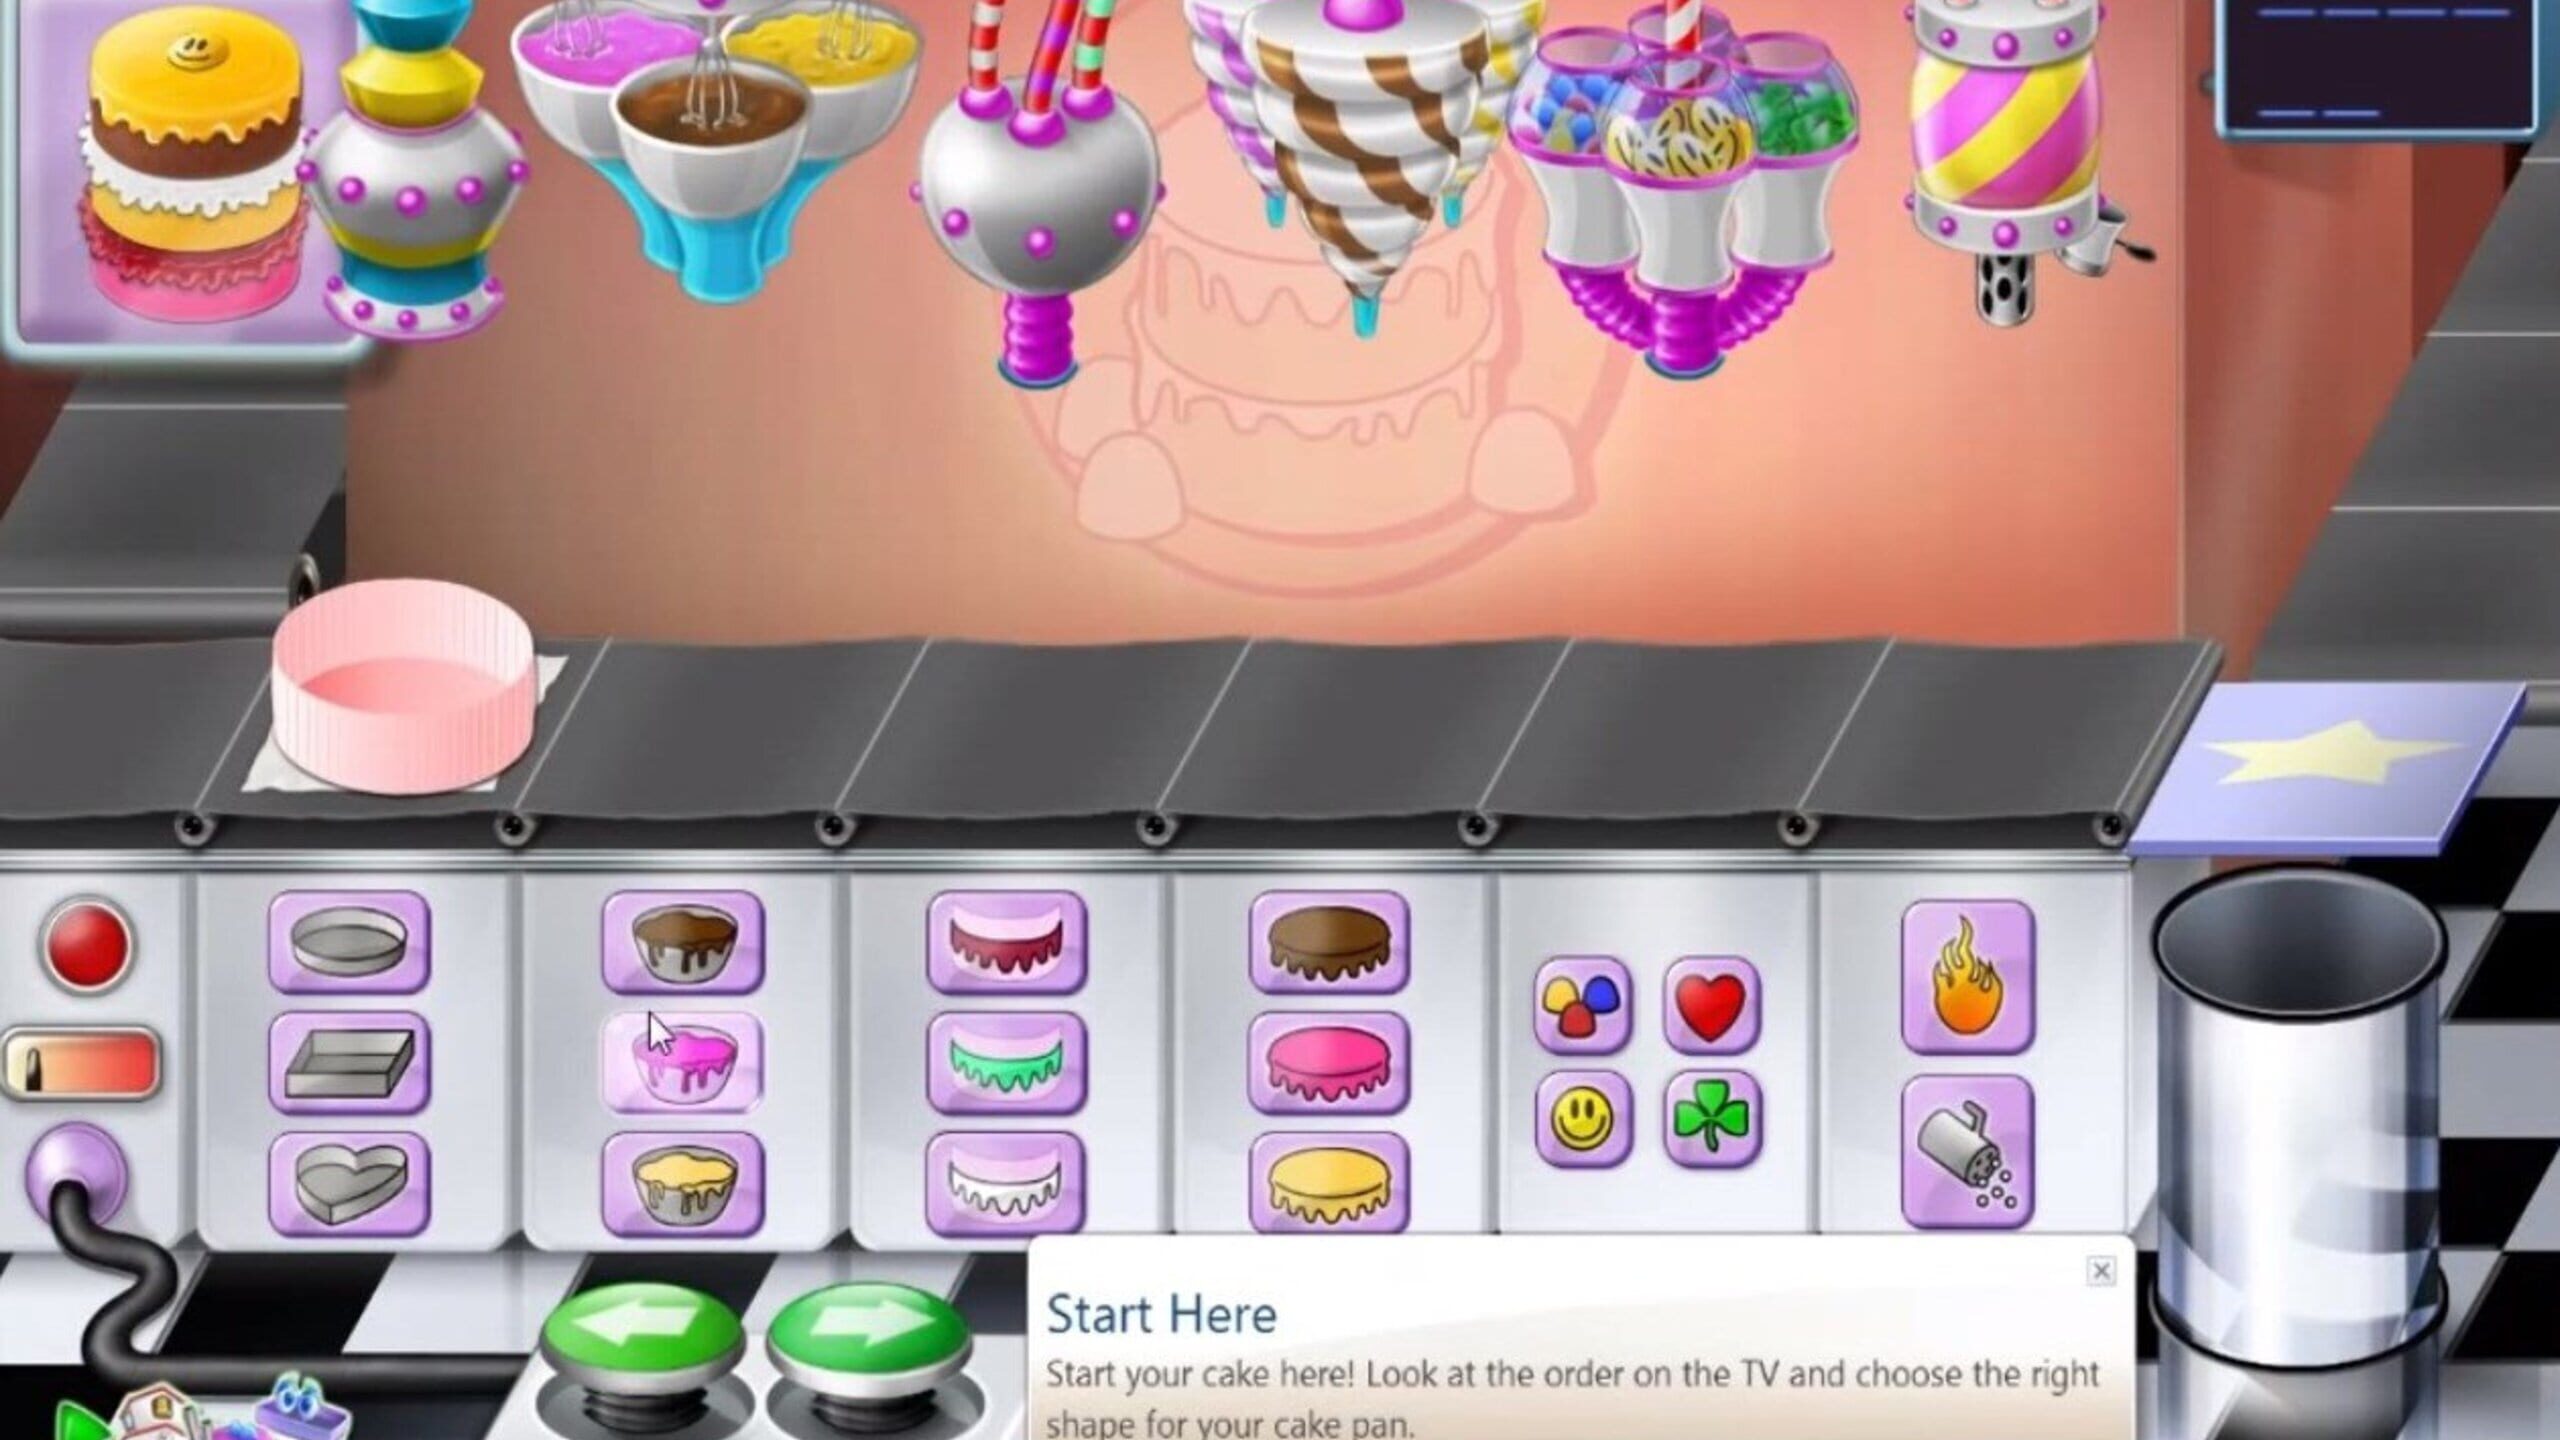 Windows 7 Games Purble Place - How to Play Purble Shop - Tips and Tricks